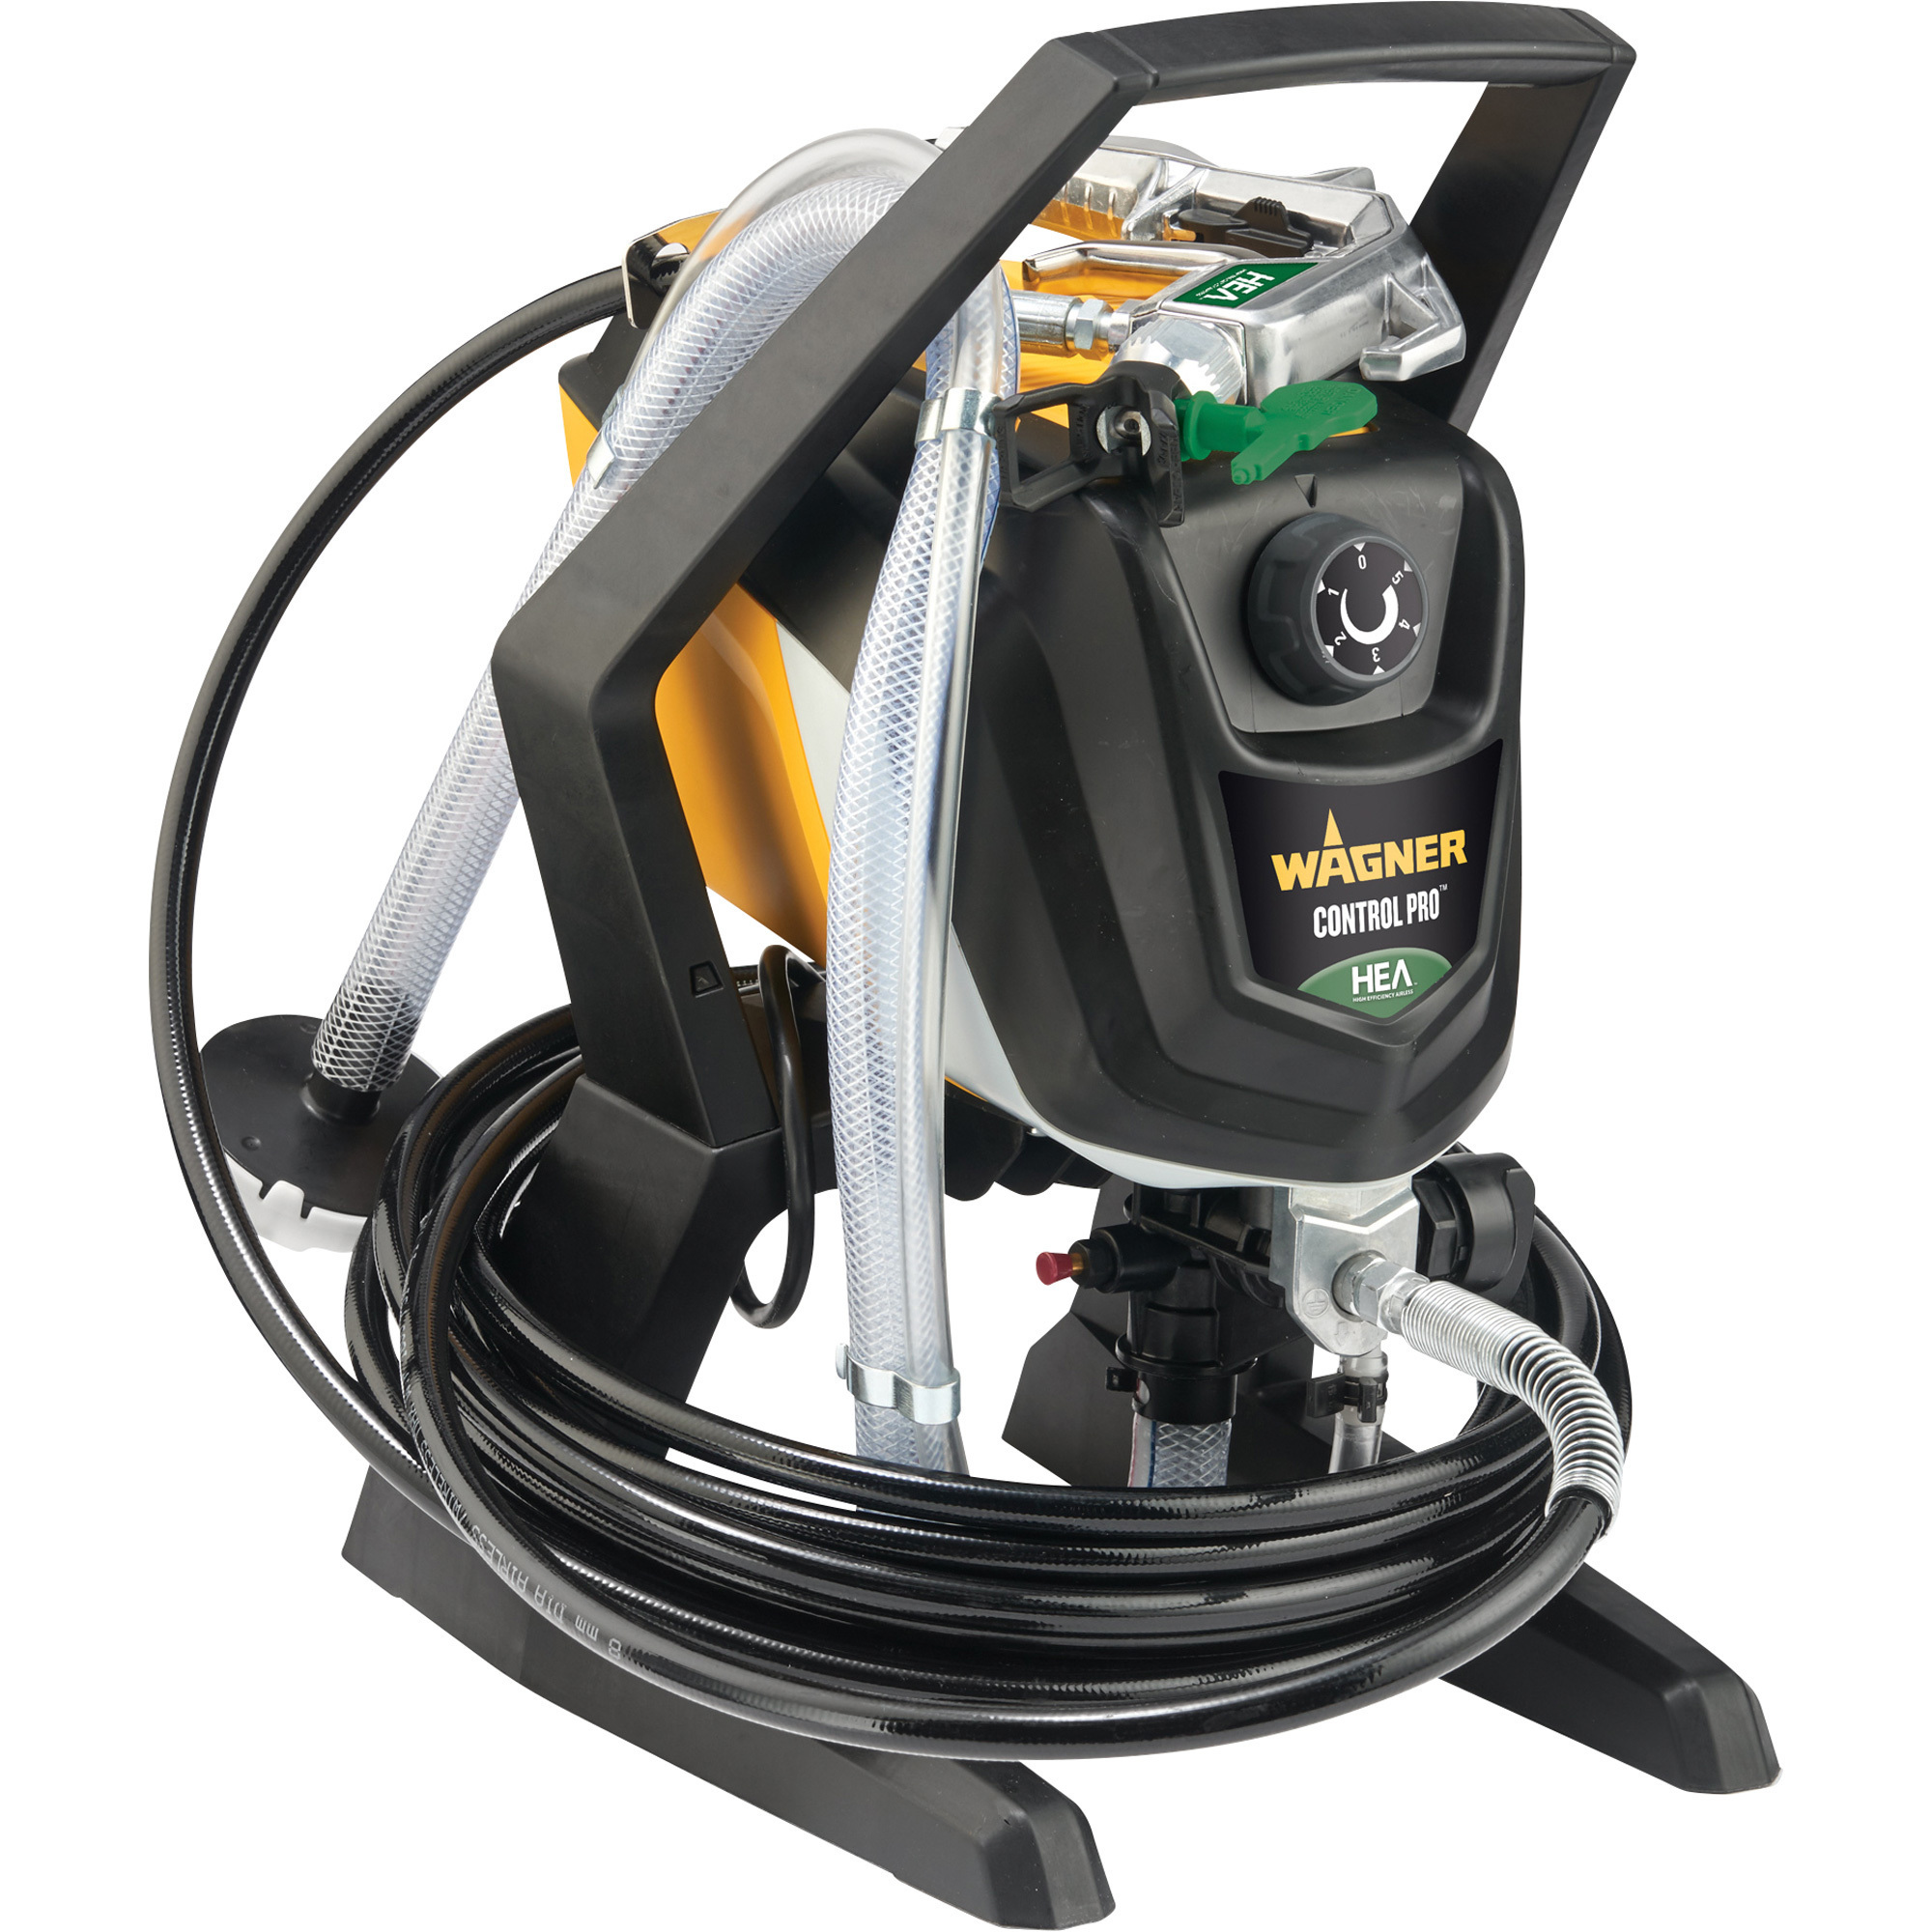 Wagner Control Pro 130 HE Airless Power Tank Paint Sprayer — 0.35 HP, 120V,  10 Amp, 1400 PSI, Model# 0580678